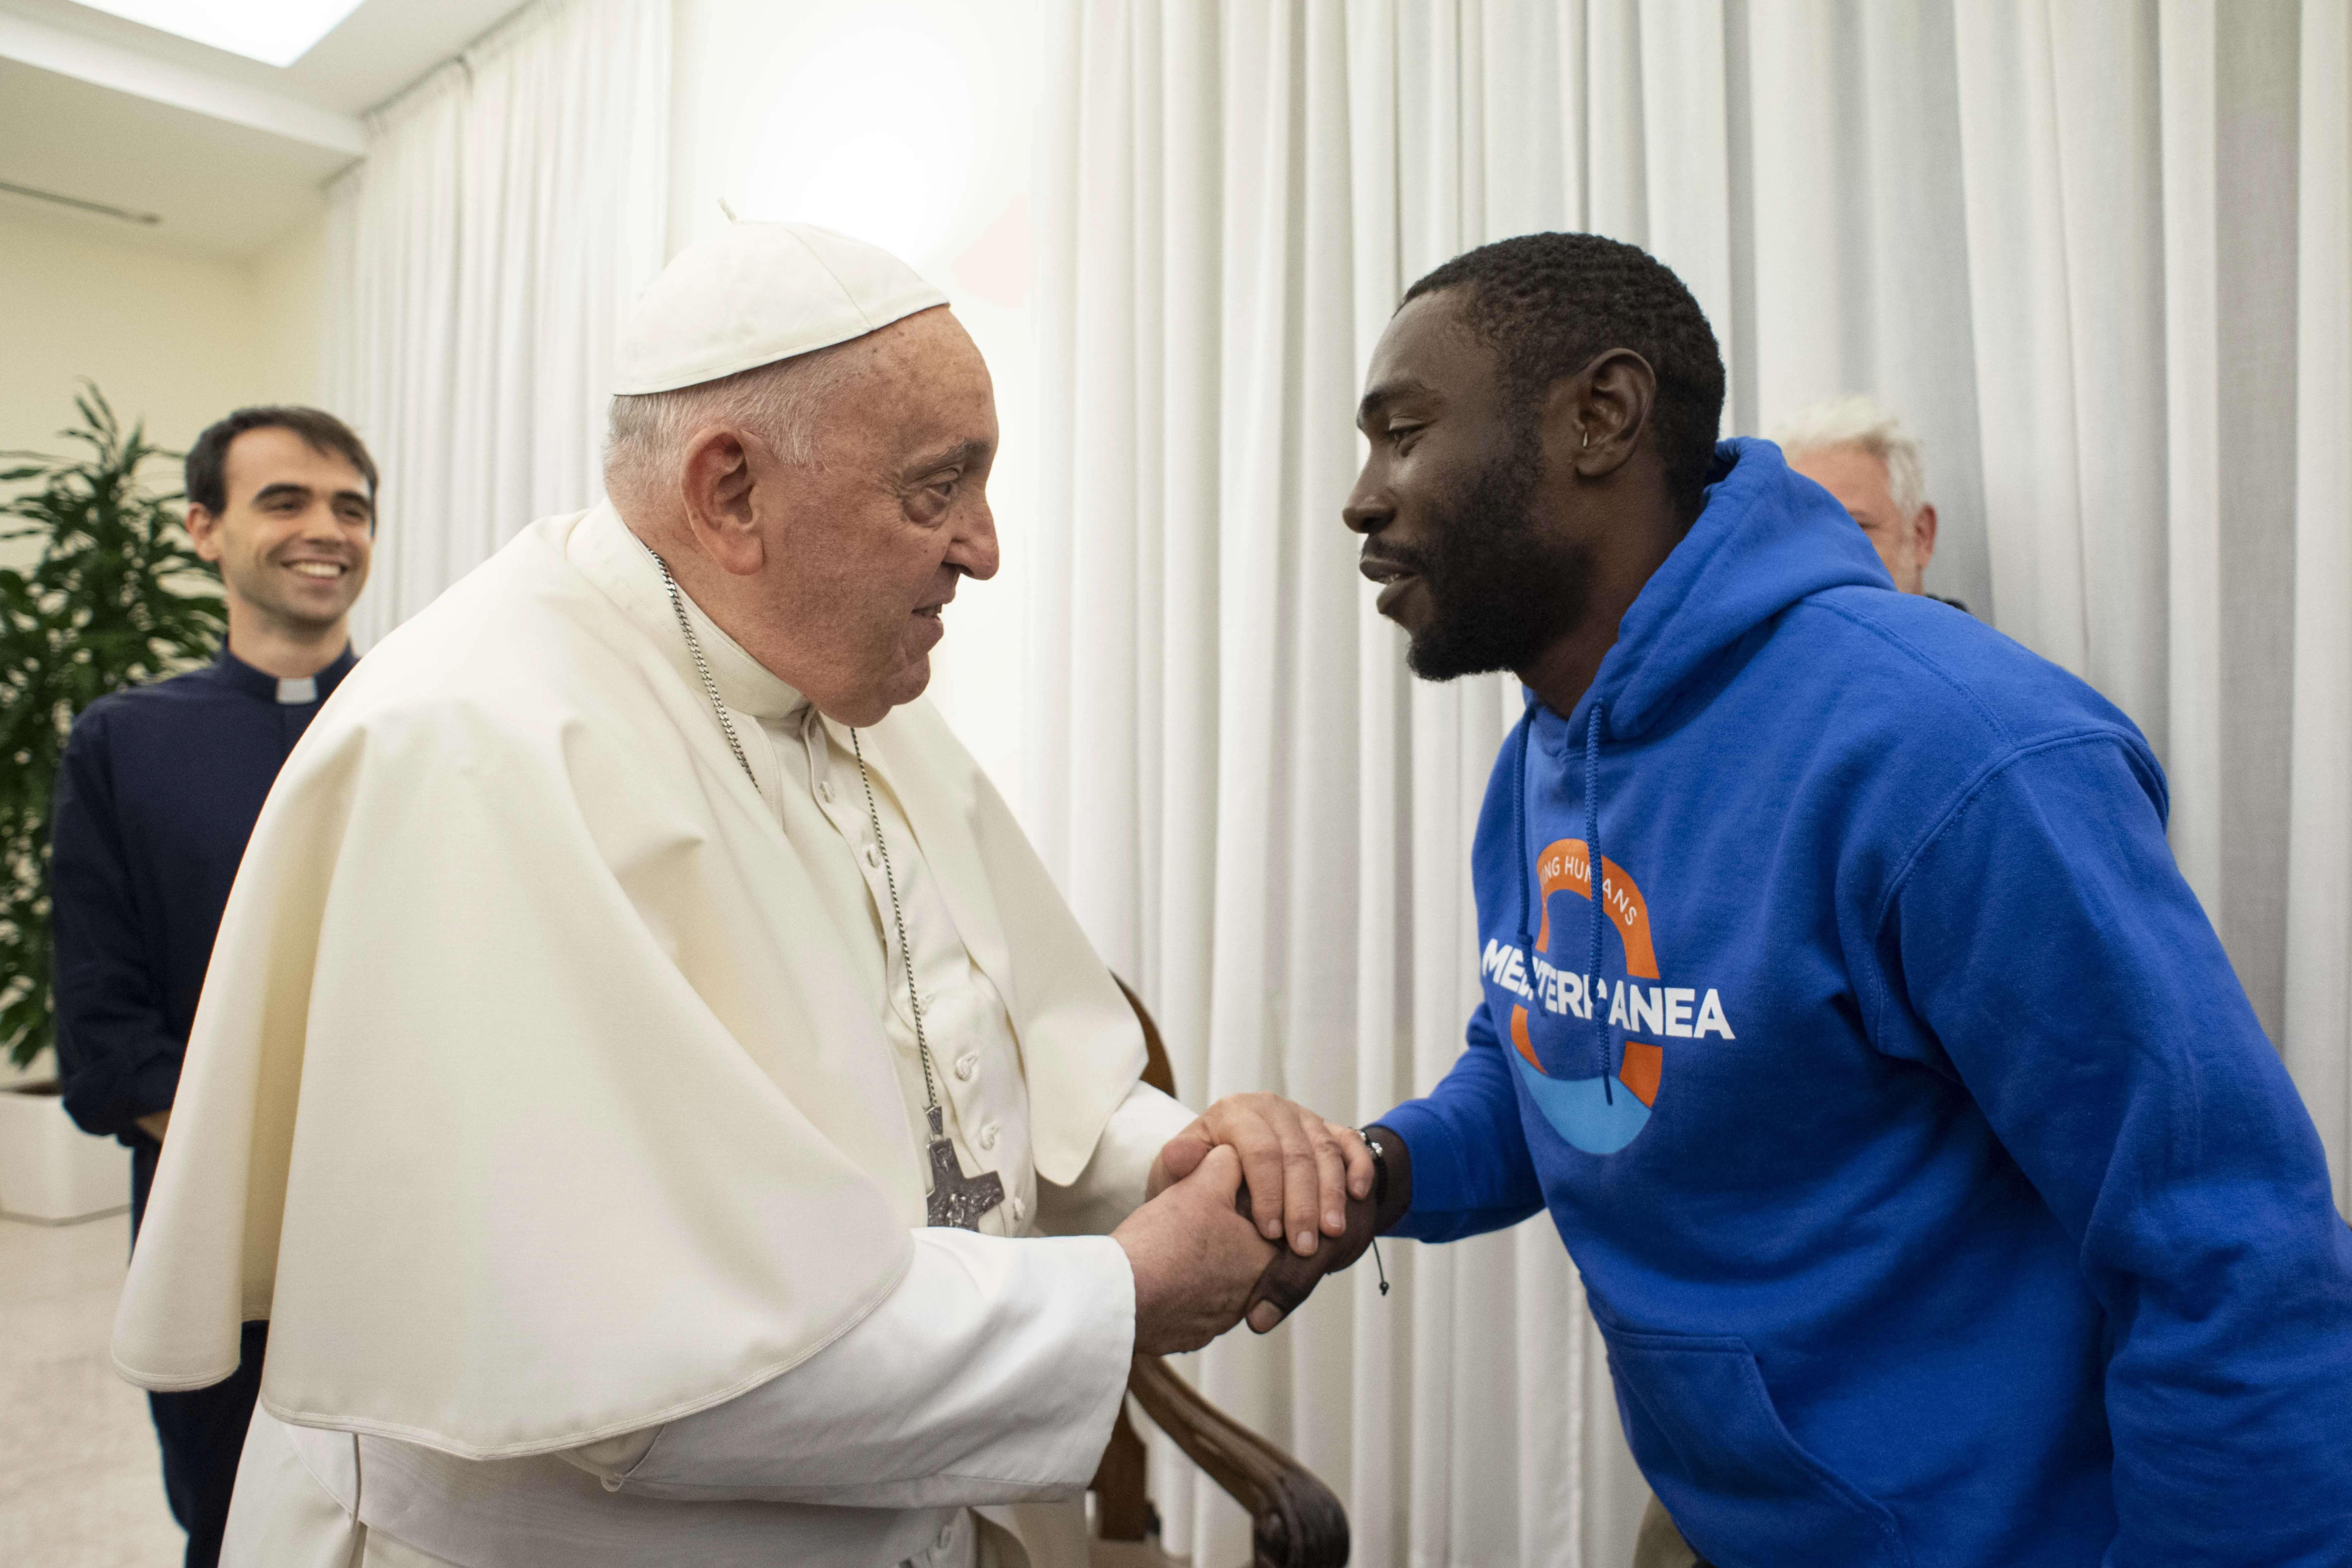 Pope Francis meets with Mbengue Nyimbilo Crepin, a 30-year-old man from Cameroon who shared his story during a meeting at the pope’s Vatican City residence Casa Santa Marta on Nov. 17. Credit: Vatican Media